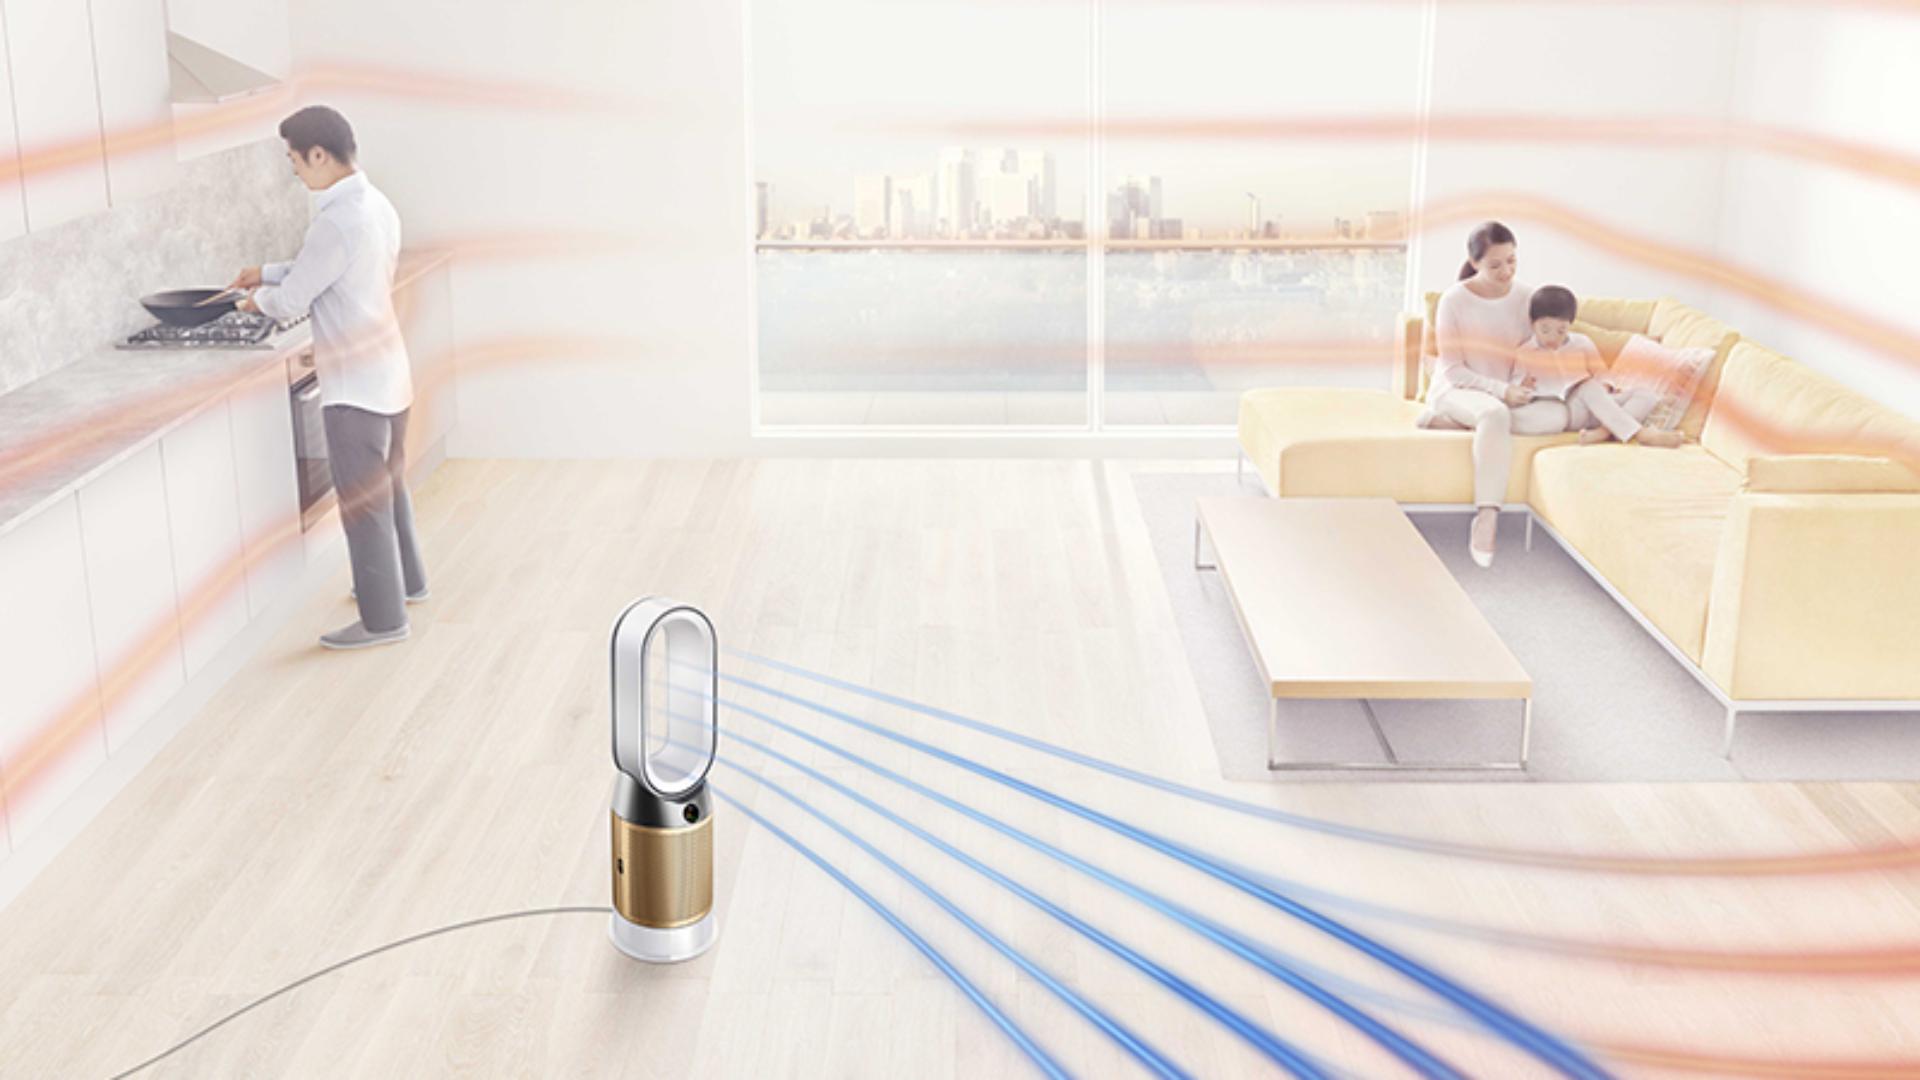 The Dyson Pure Hot+Cool Cryptomic projecting heated and cooling purified air throughout a large open lounge and kitchen